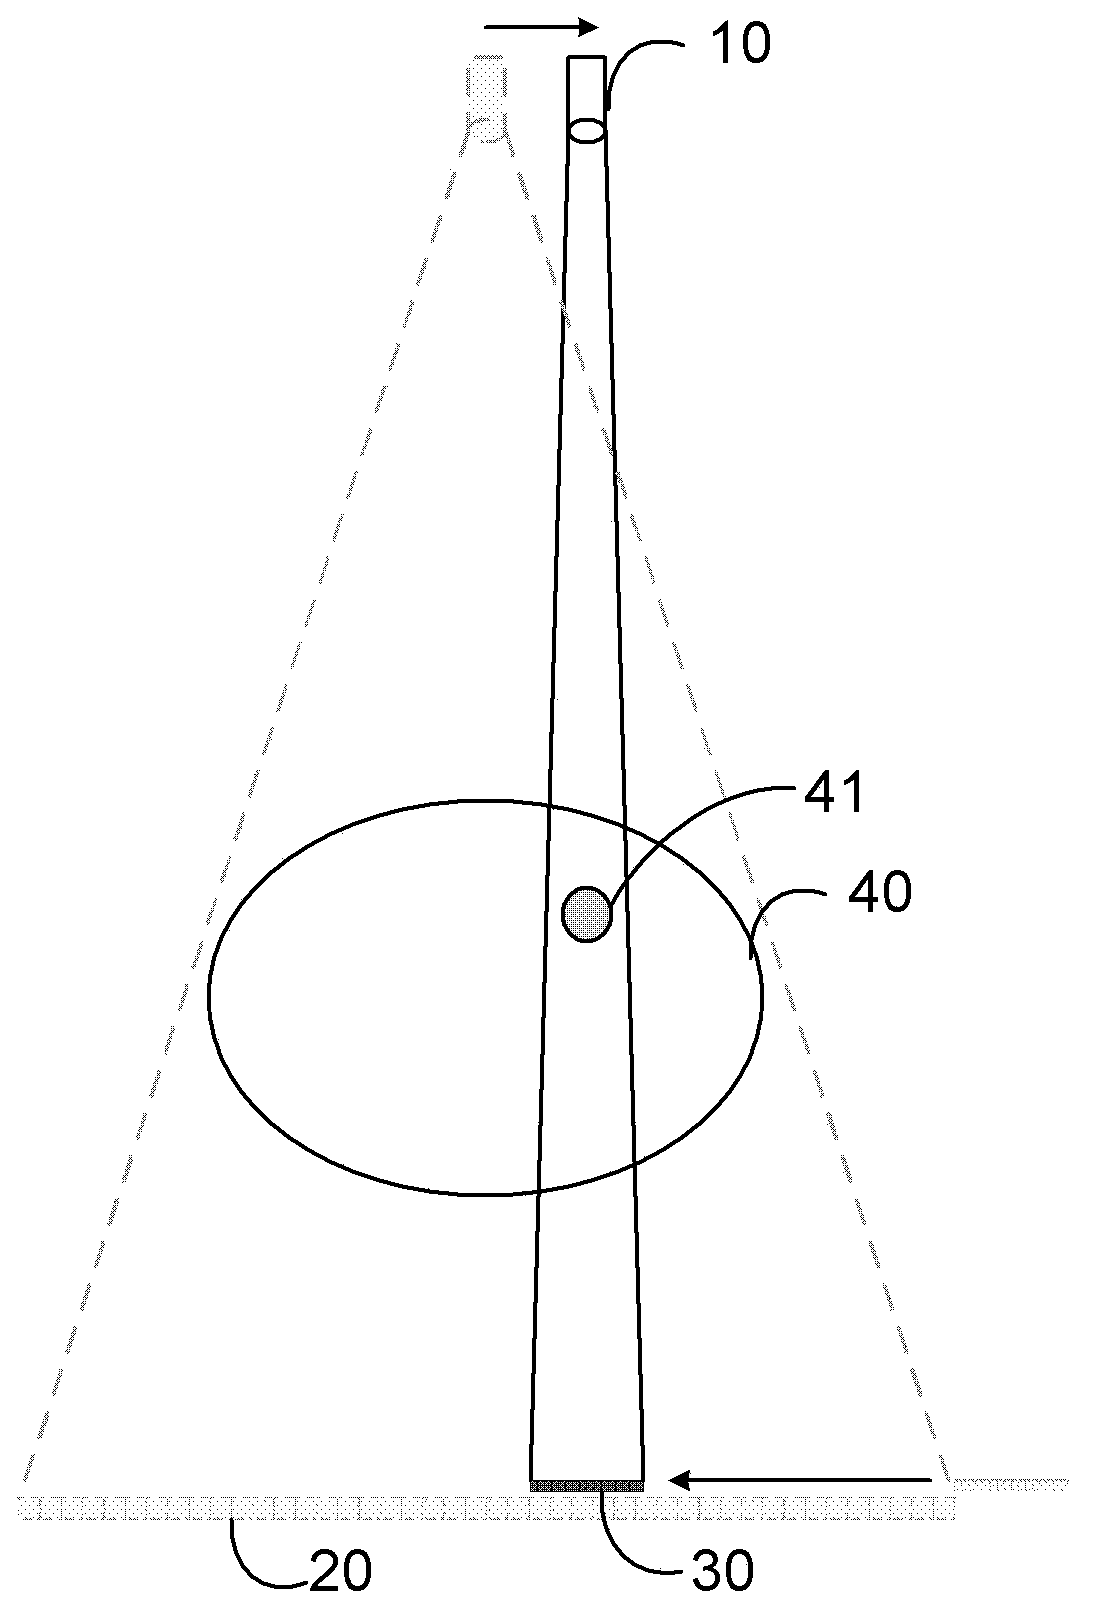 CT imaging system and method